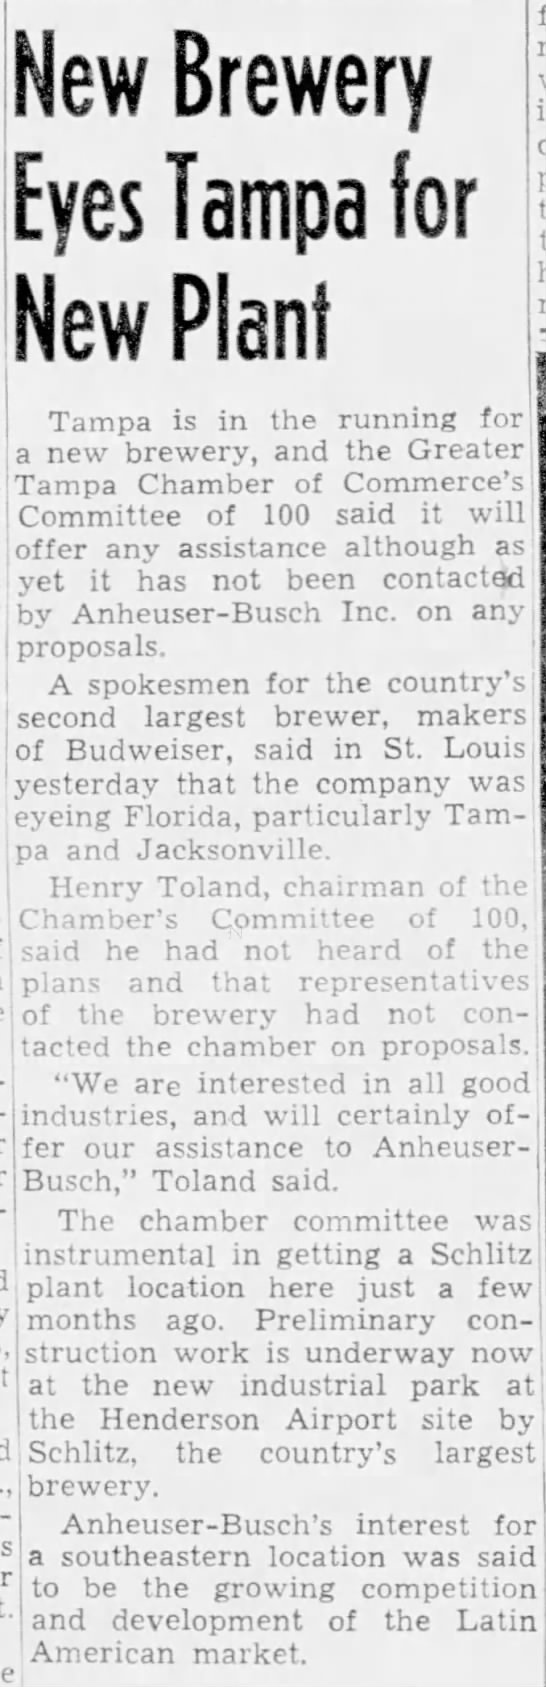 Busch Brewery plans for land acquisition in more detail on April 12, 1957. - 